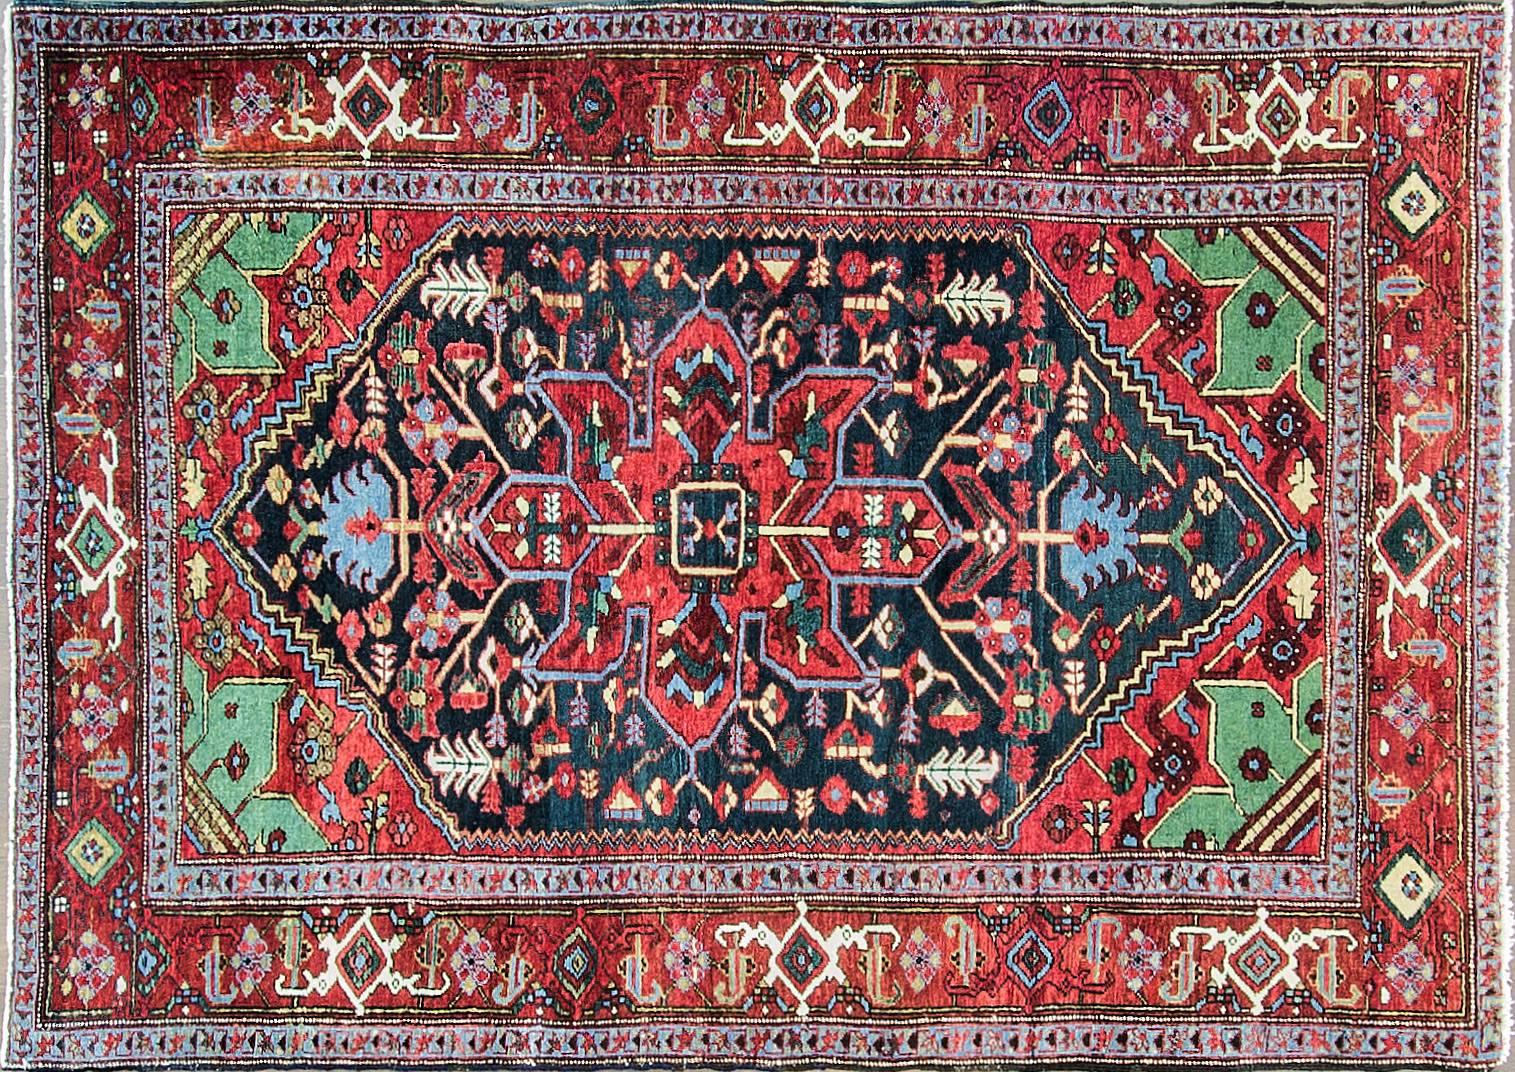 Serapi (antique Heriz) rugs are to all intents and purposes a particular type or grade of what are called Heriz rugs more specifically the highest grade in terms of weave and very probably the oldest type in terms of age. Heriz carpets are generally